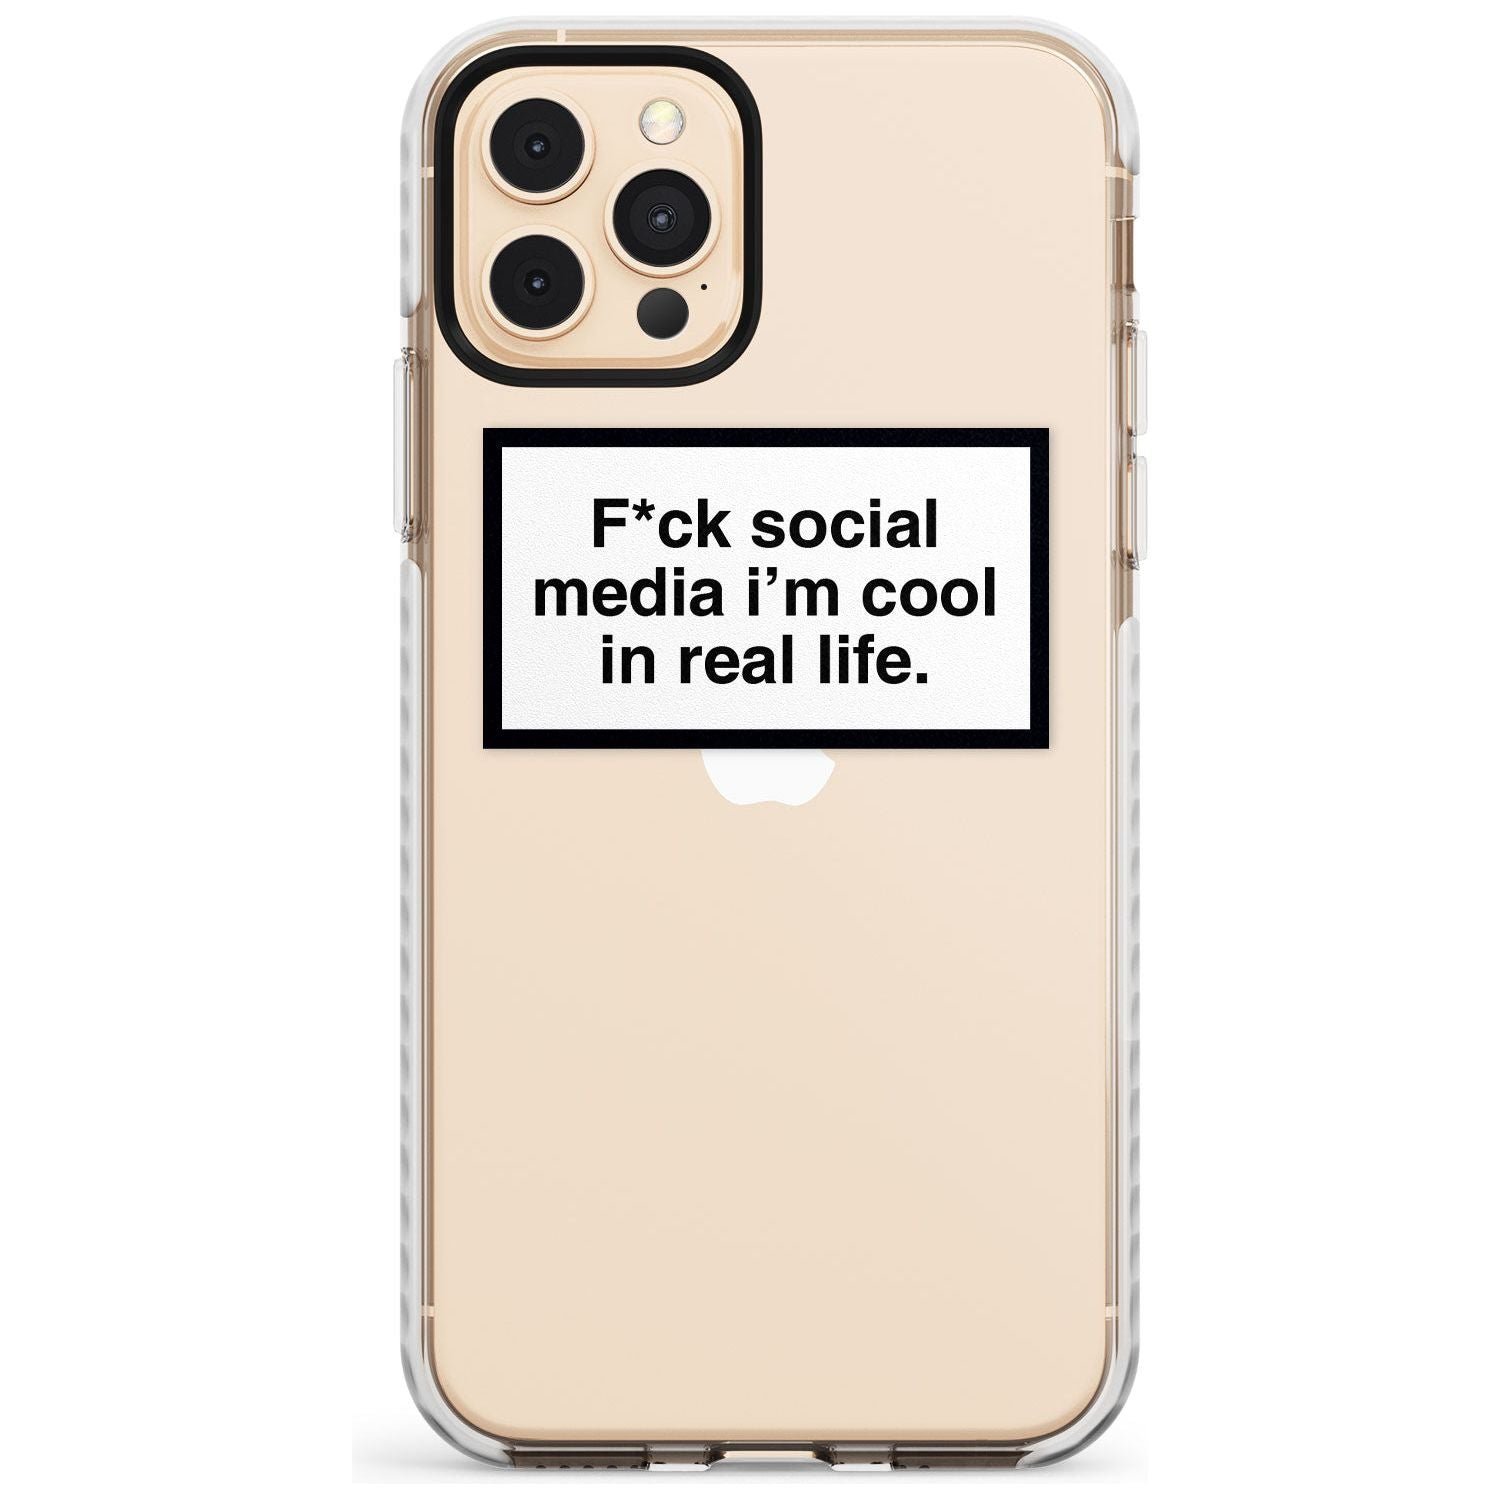 F*ck social media I'm cool in real life Slim TPU Phone Case for iPhone 11 Pro Max